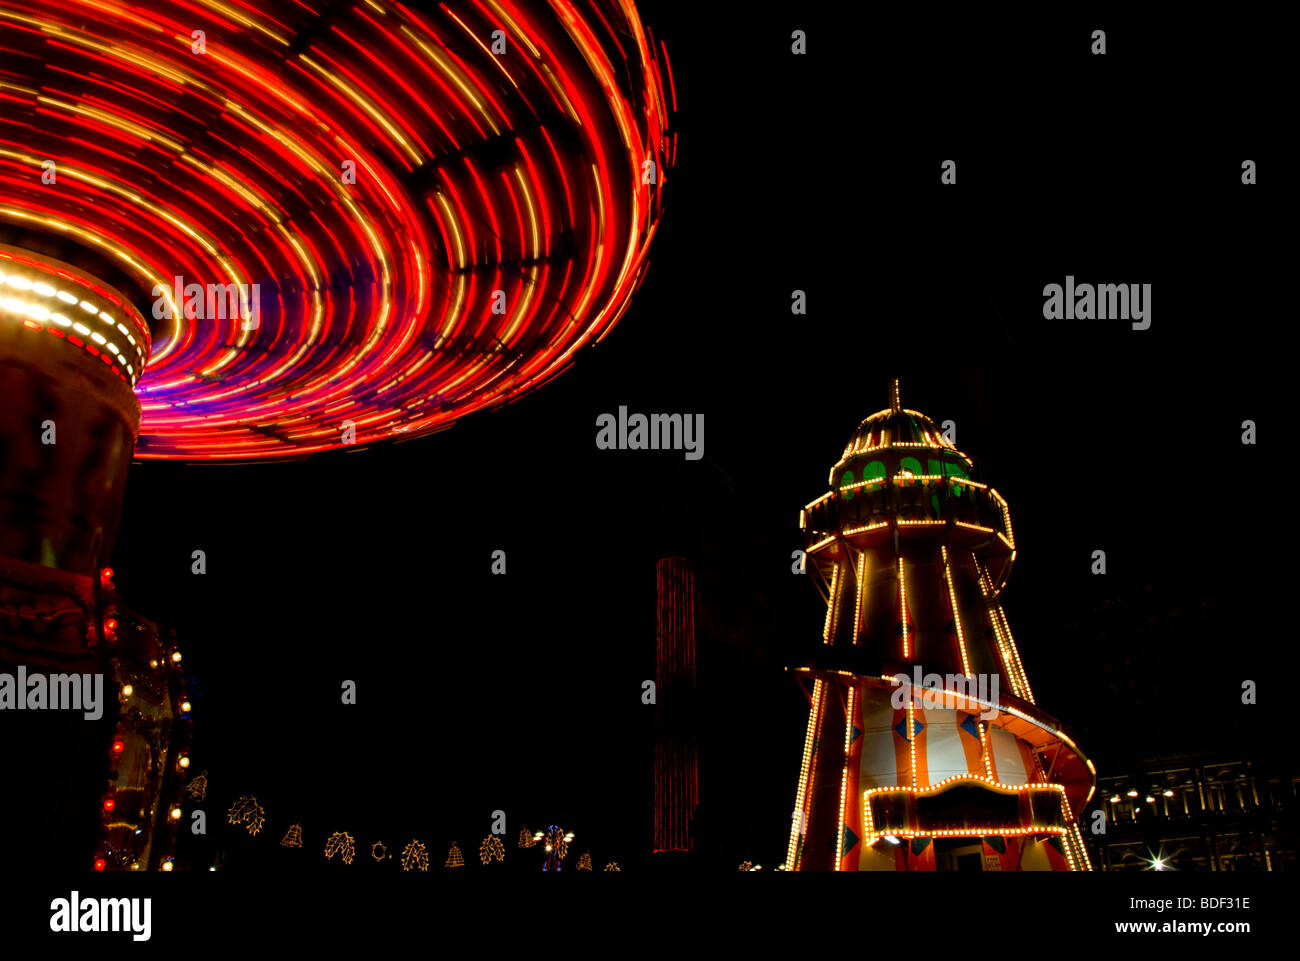 A spinning fairground carousel and helter skelter at night Stock Photo